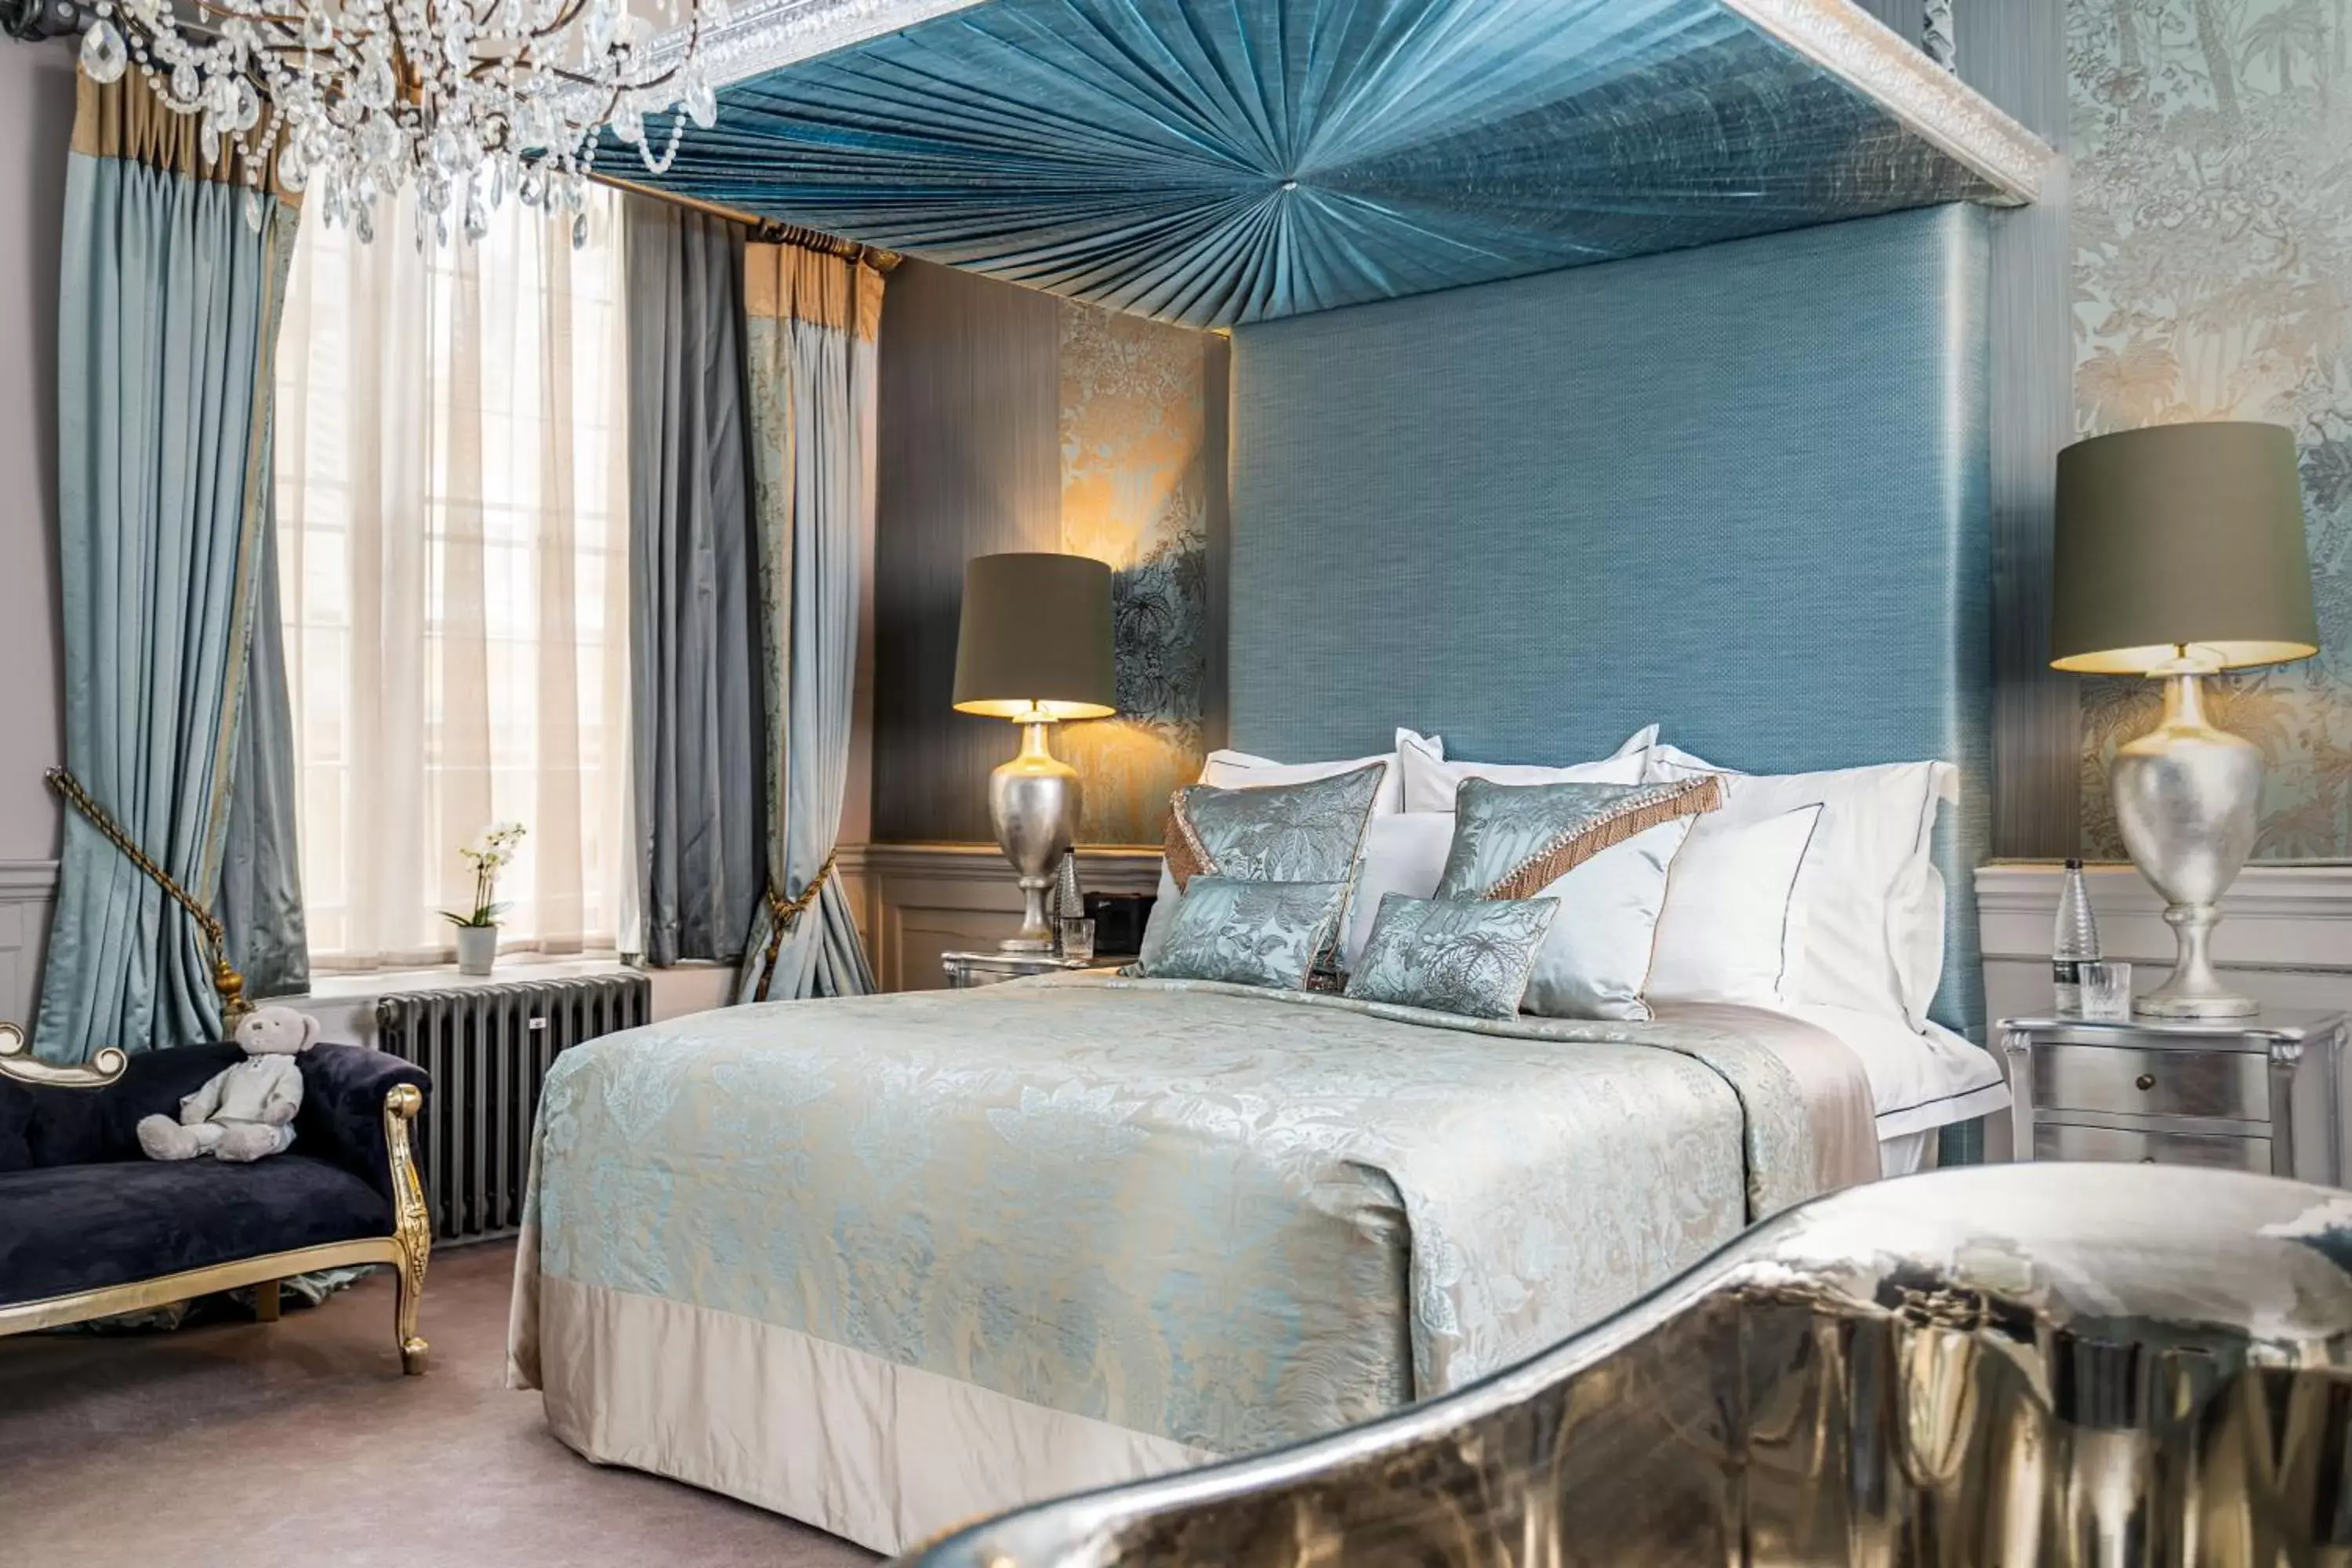 Three-Bedroom Townhouse in The Gainsborough Bath Spa - Small Luxury Hotels of the World